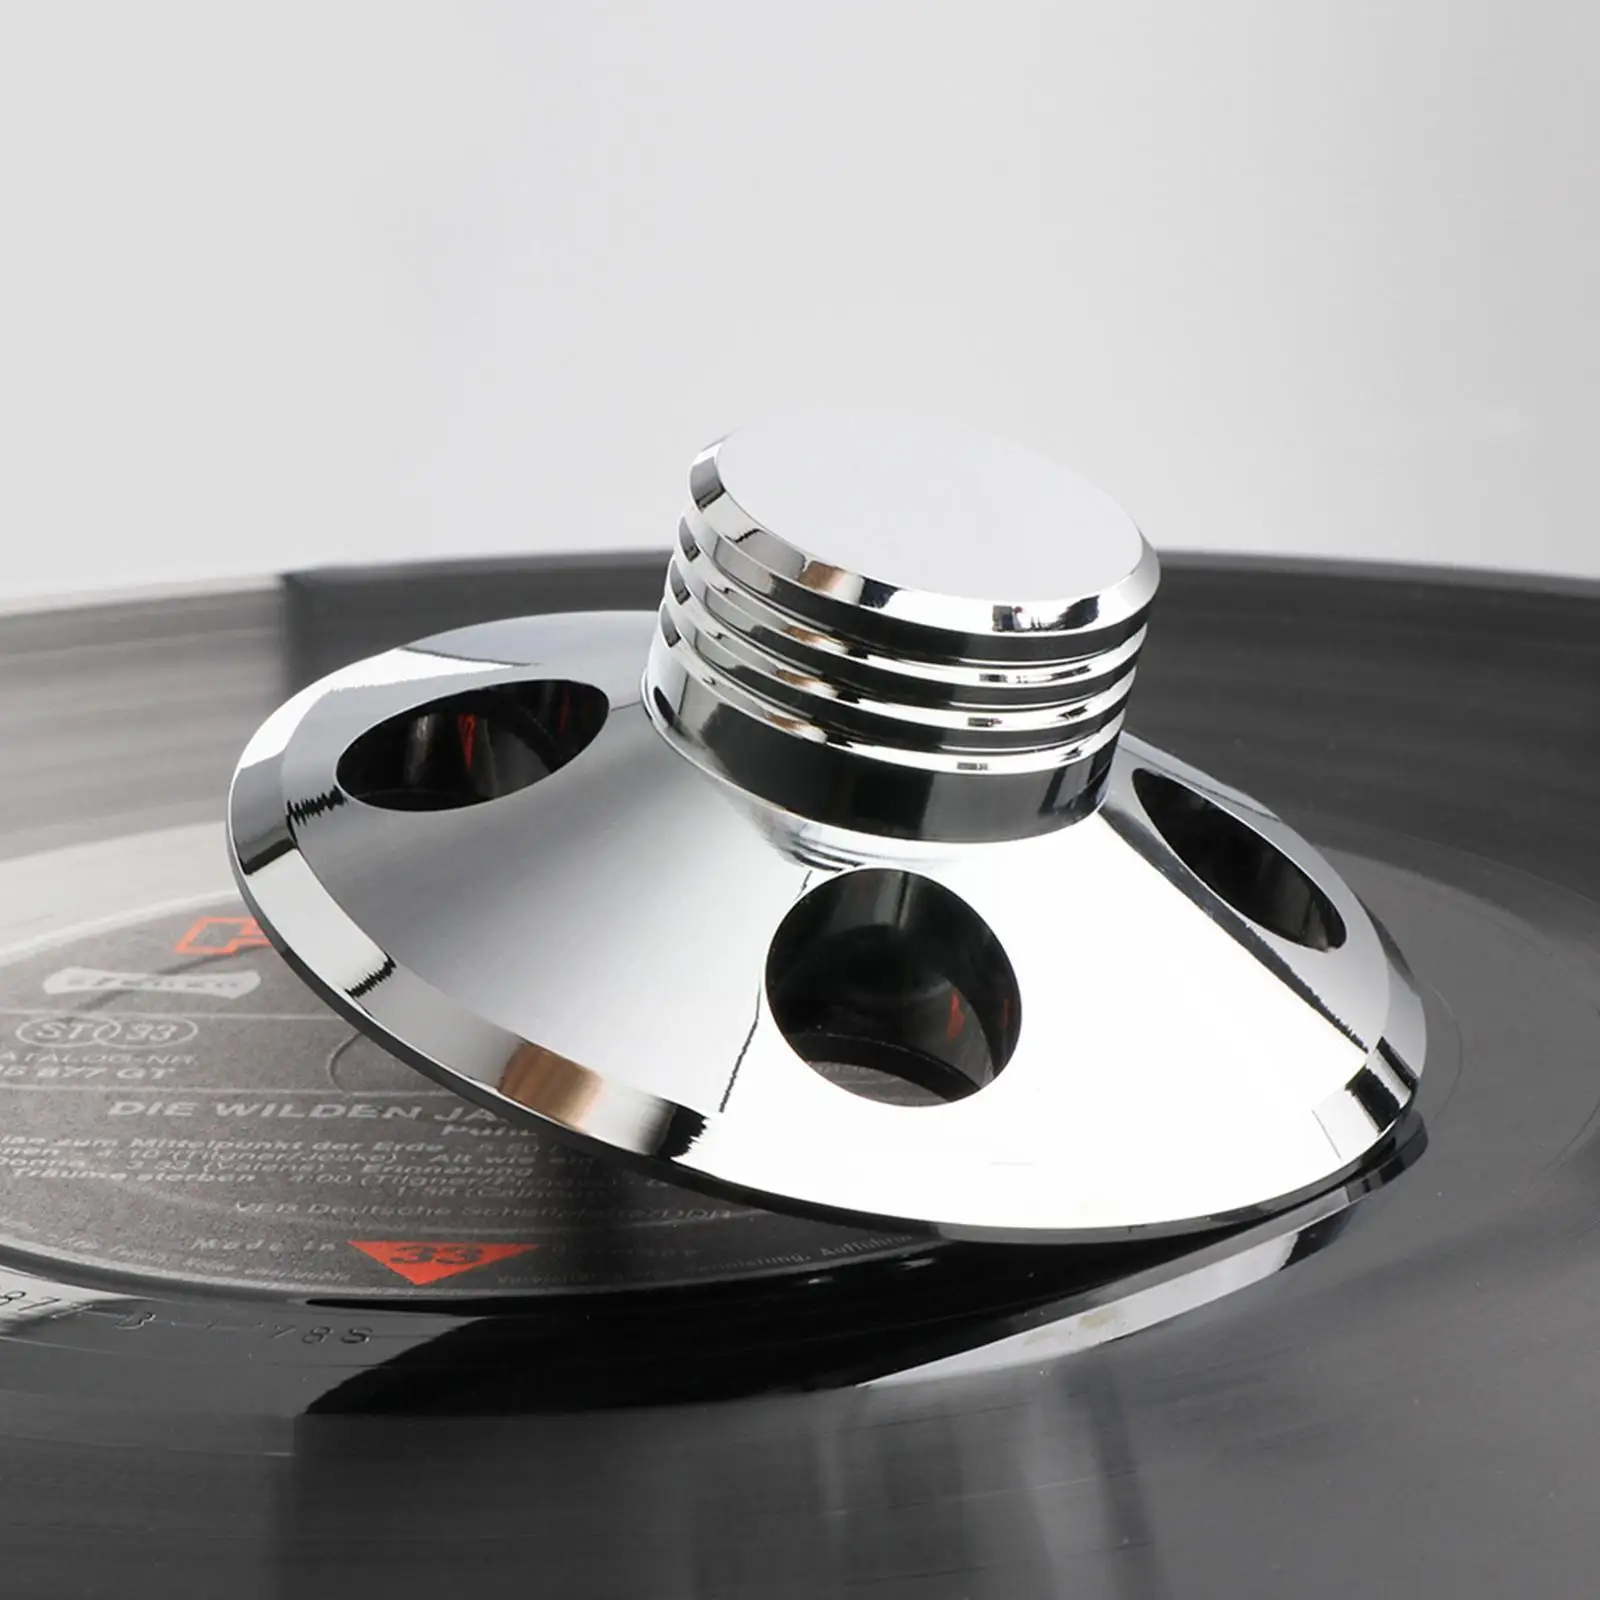 New Audio LP Vinyl Turntables Metal Disc Stabilizer Hifi Weight Player Clamp Record F3H5